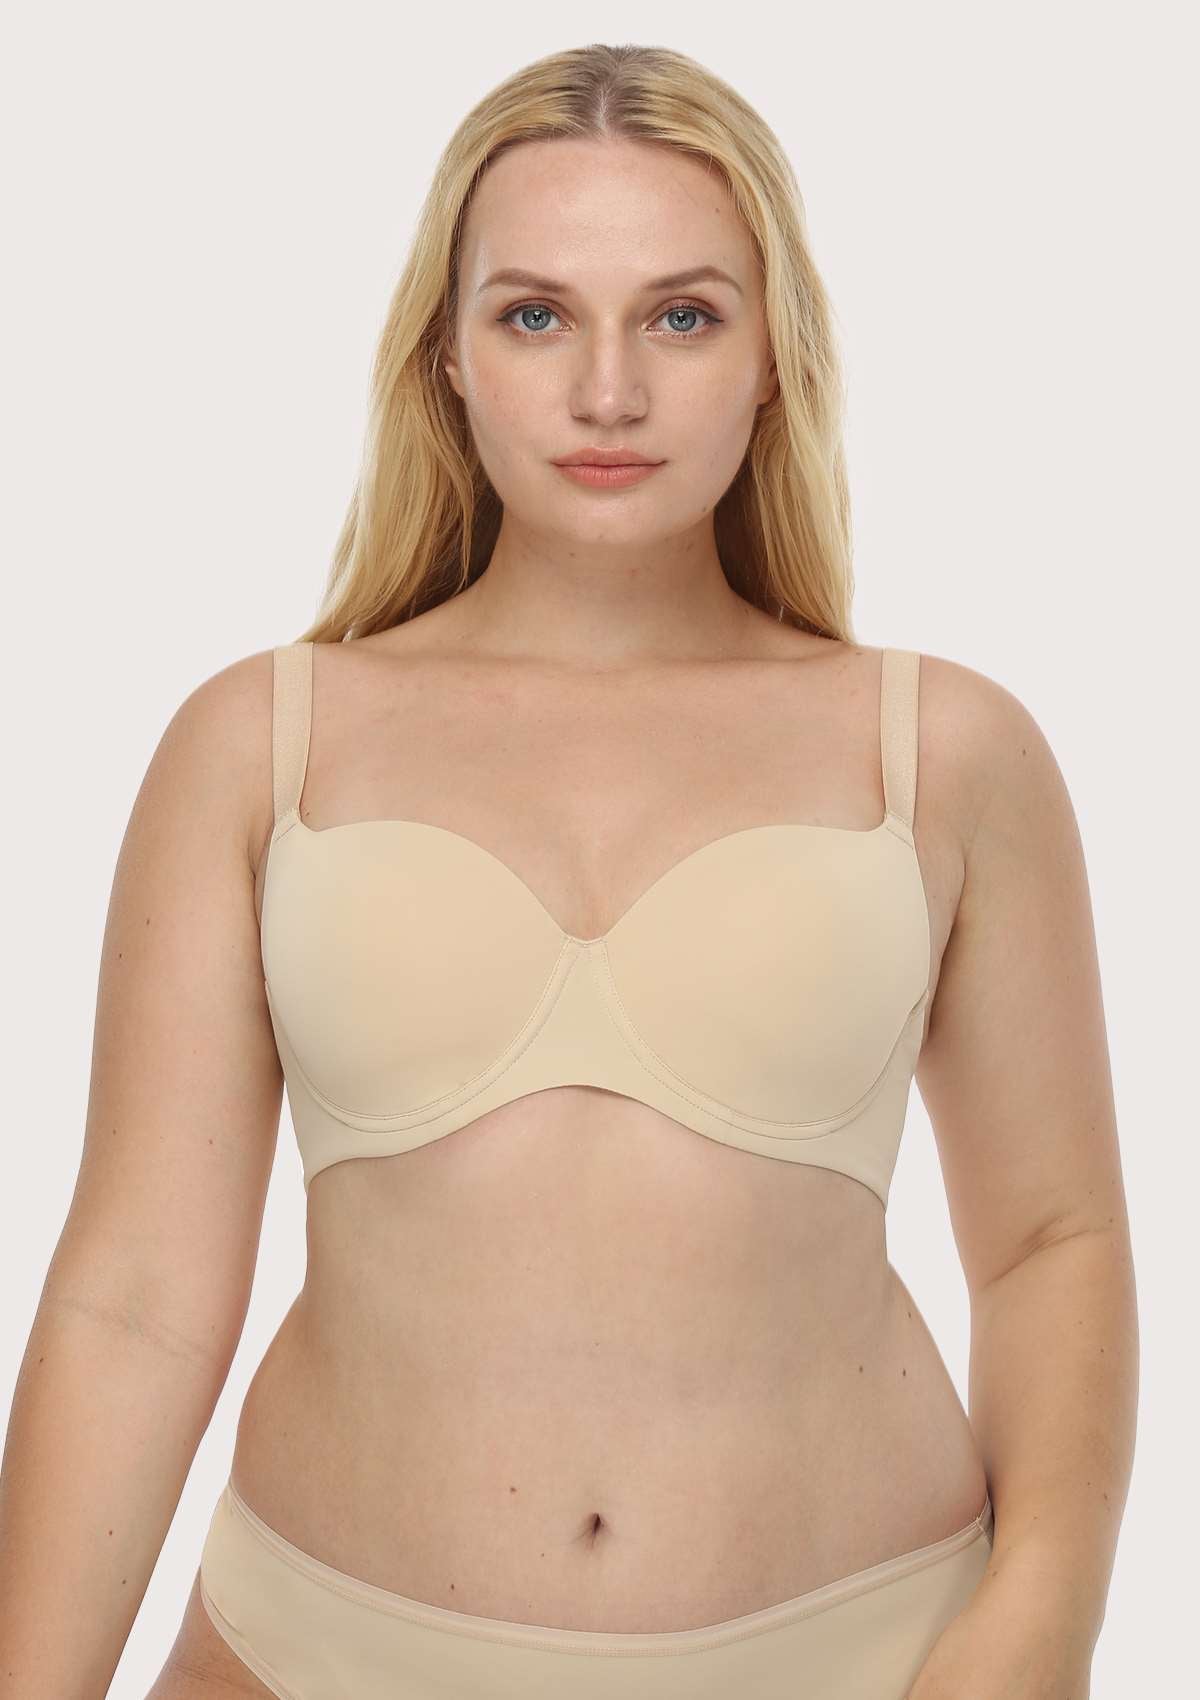 HSIA Gemma Smooth Padded T-shirt Everyday Bras - For Lift And Comfort - Beige / 38 / C